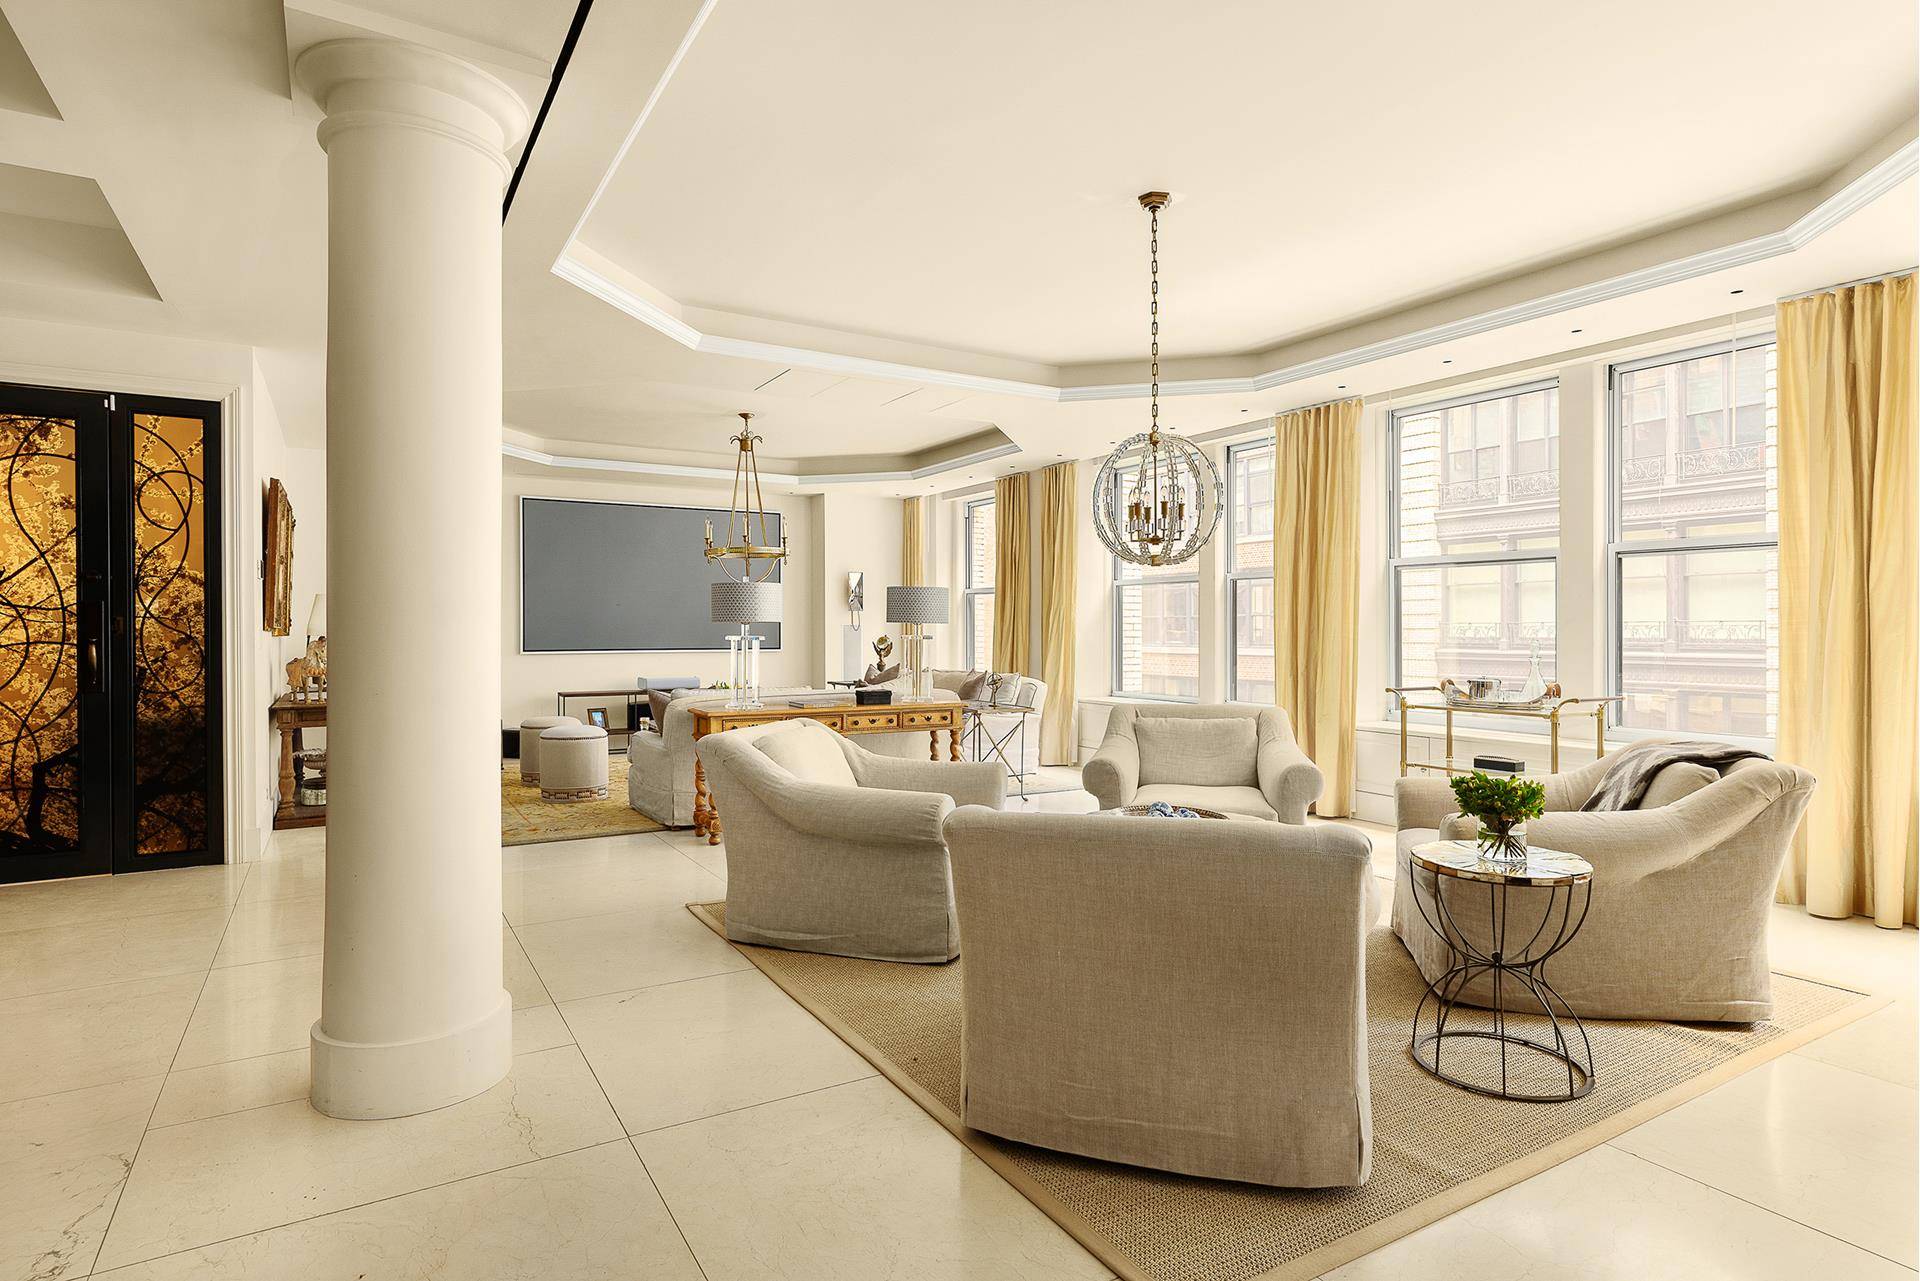 Residence 6 at 17 West 17th Street is an expansive 3 bedroom 3BR, 4.